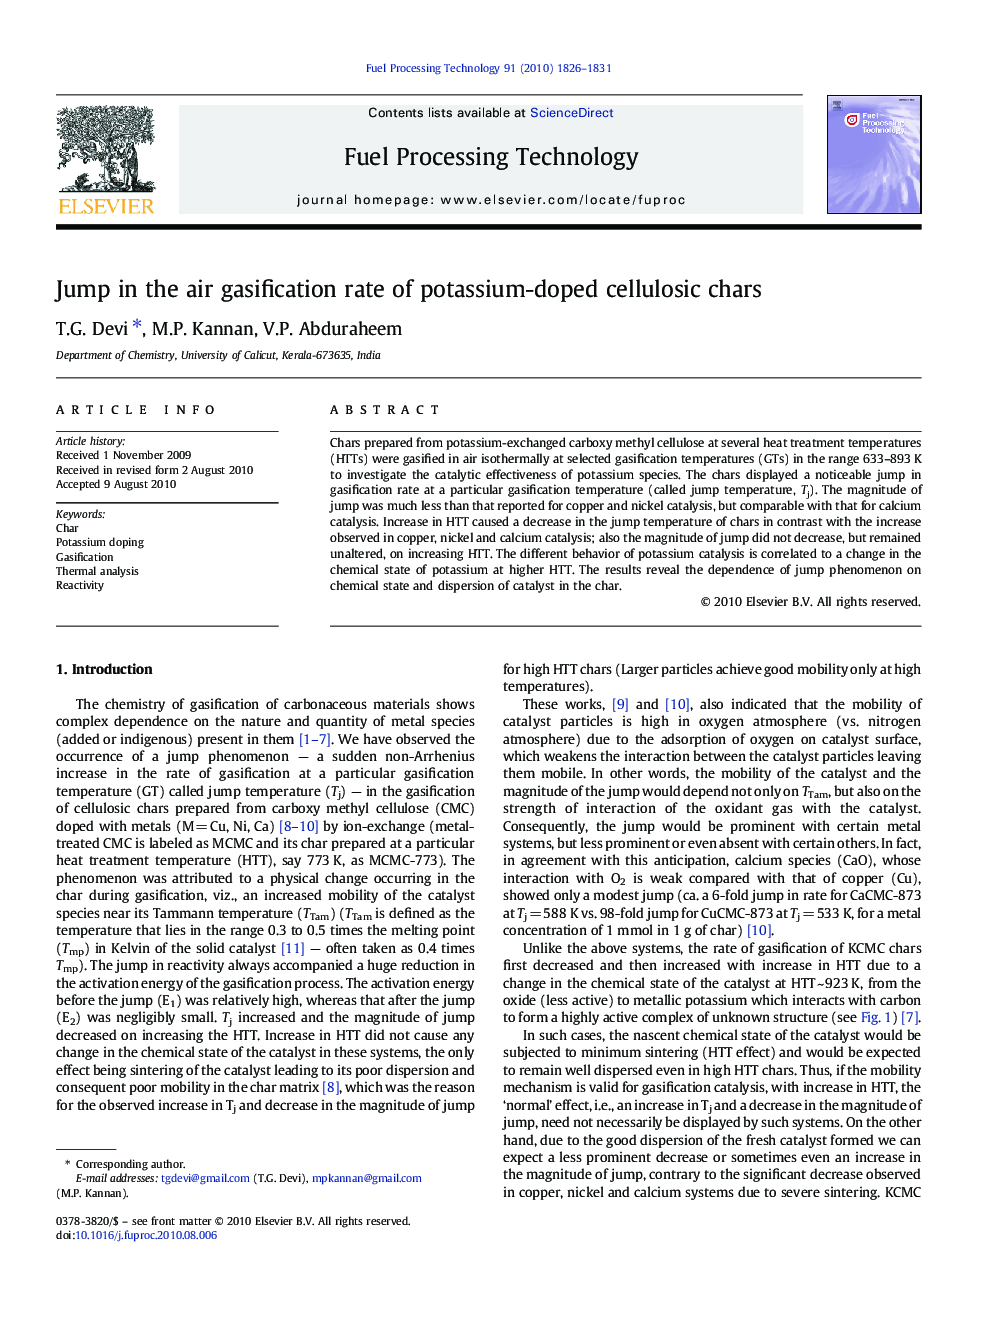 Jump in the air gasification rate of potassium-doped cellulosic chars